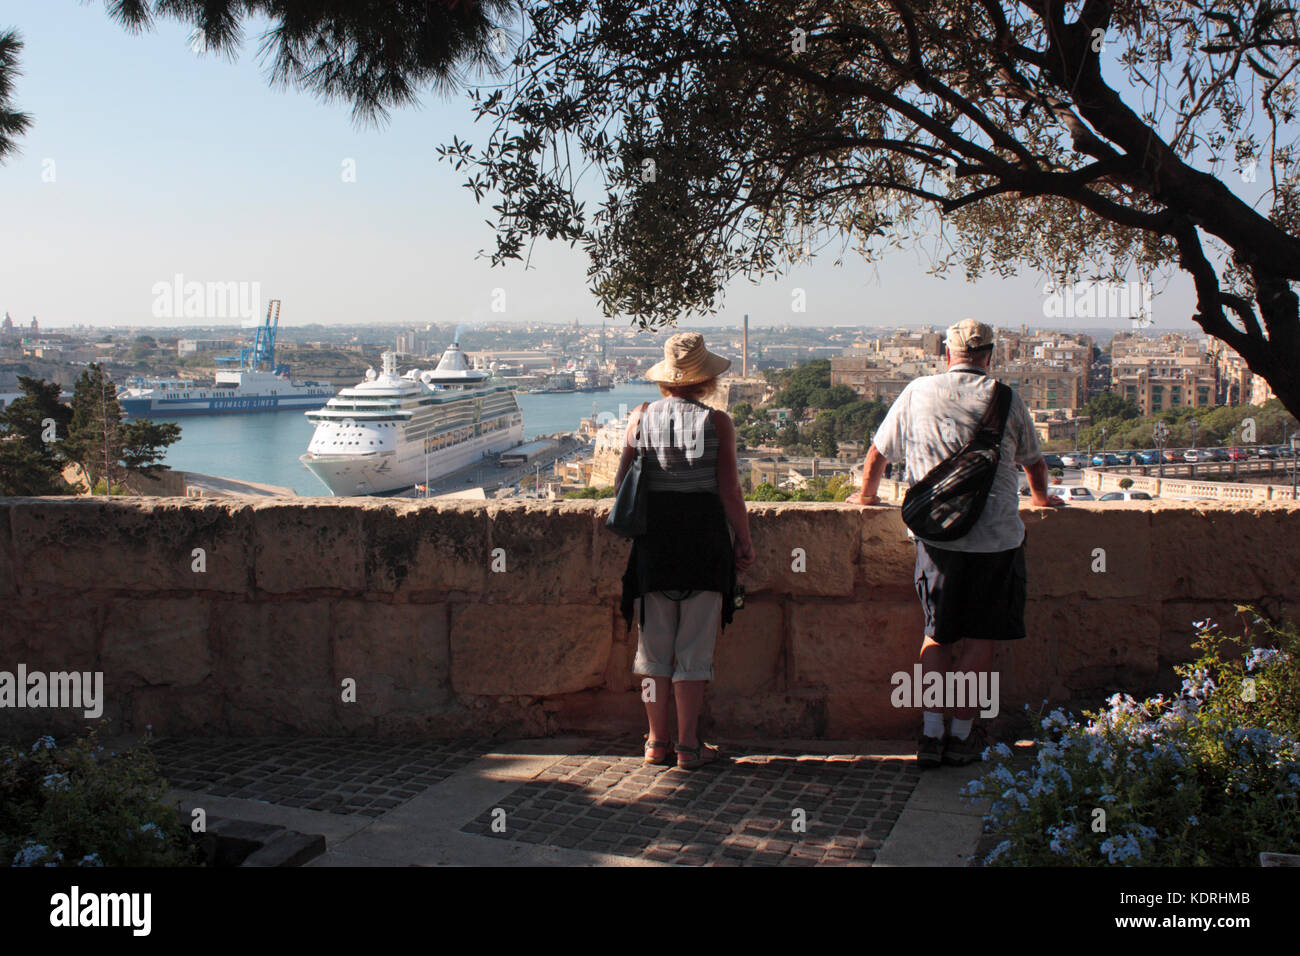 Holiday travel and tourism. Tourists taking in the view from the Upper Barrakka Gardens, Valletta, Malta, with a cruise ship visible in the distance Stock Photo